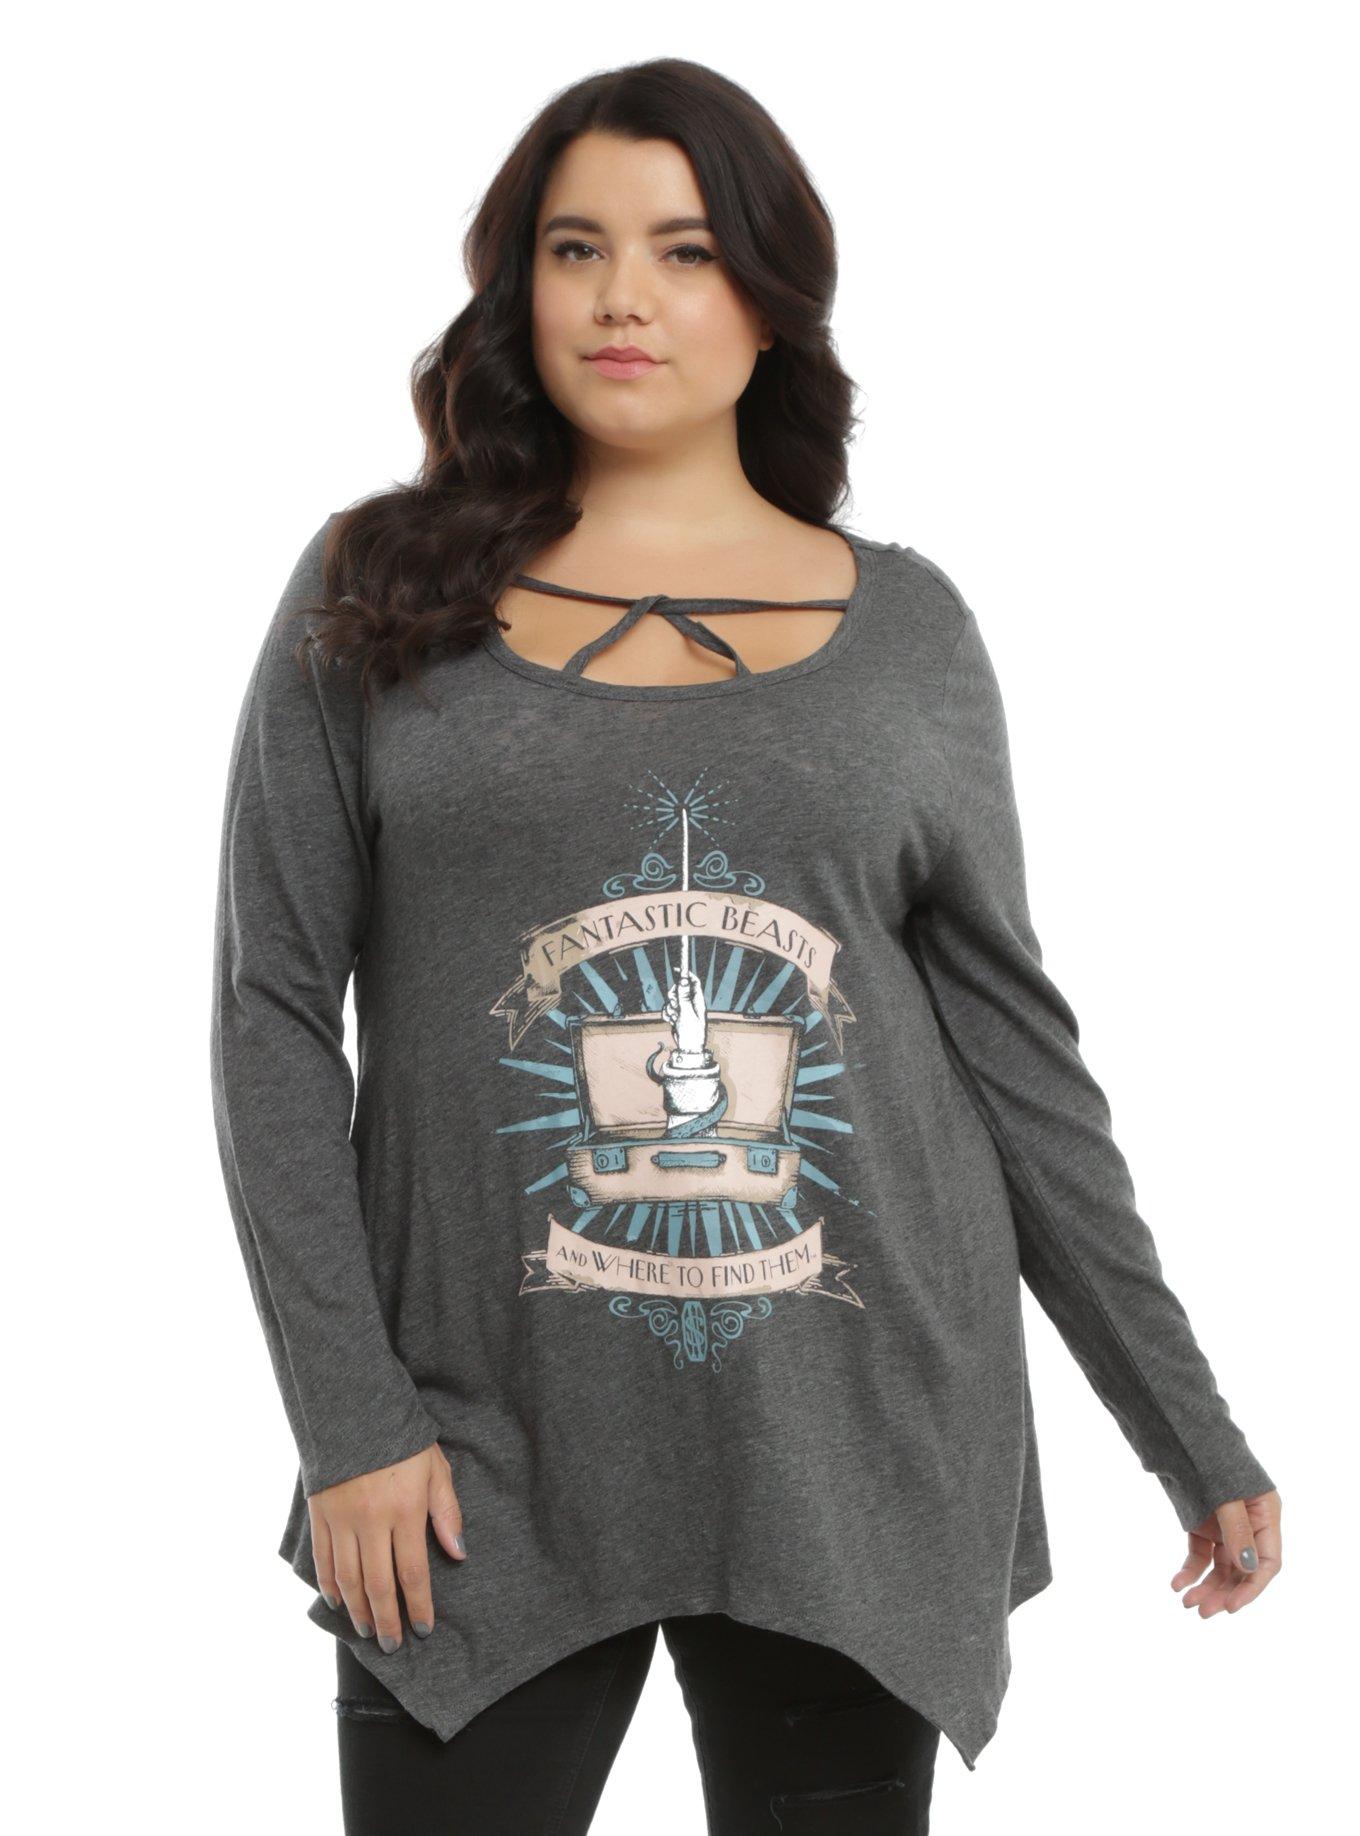 Fantastic Beasts And Where To Find Them Strappy Long-Sleeve Top Plus Size, GREY, hi-res